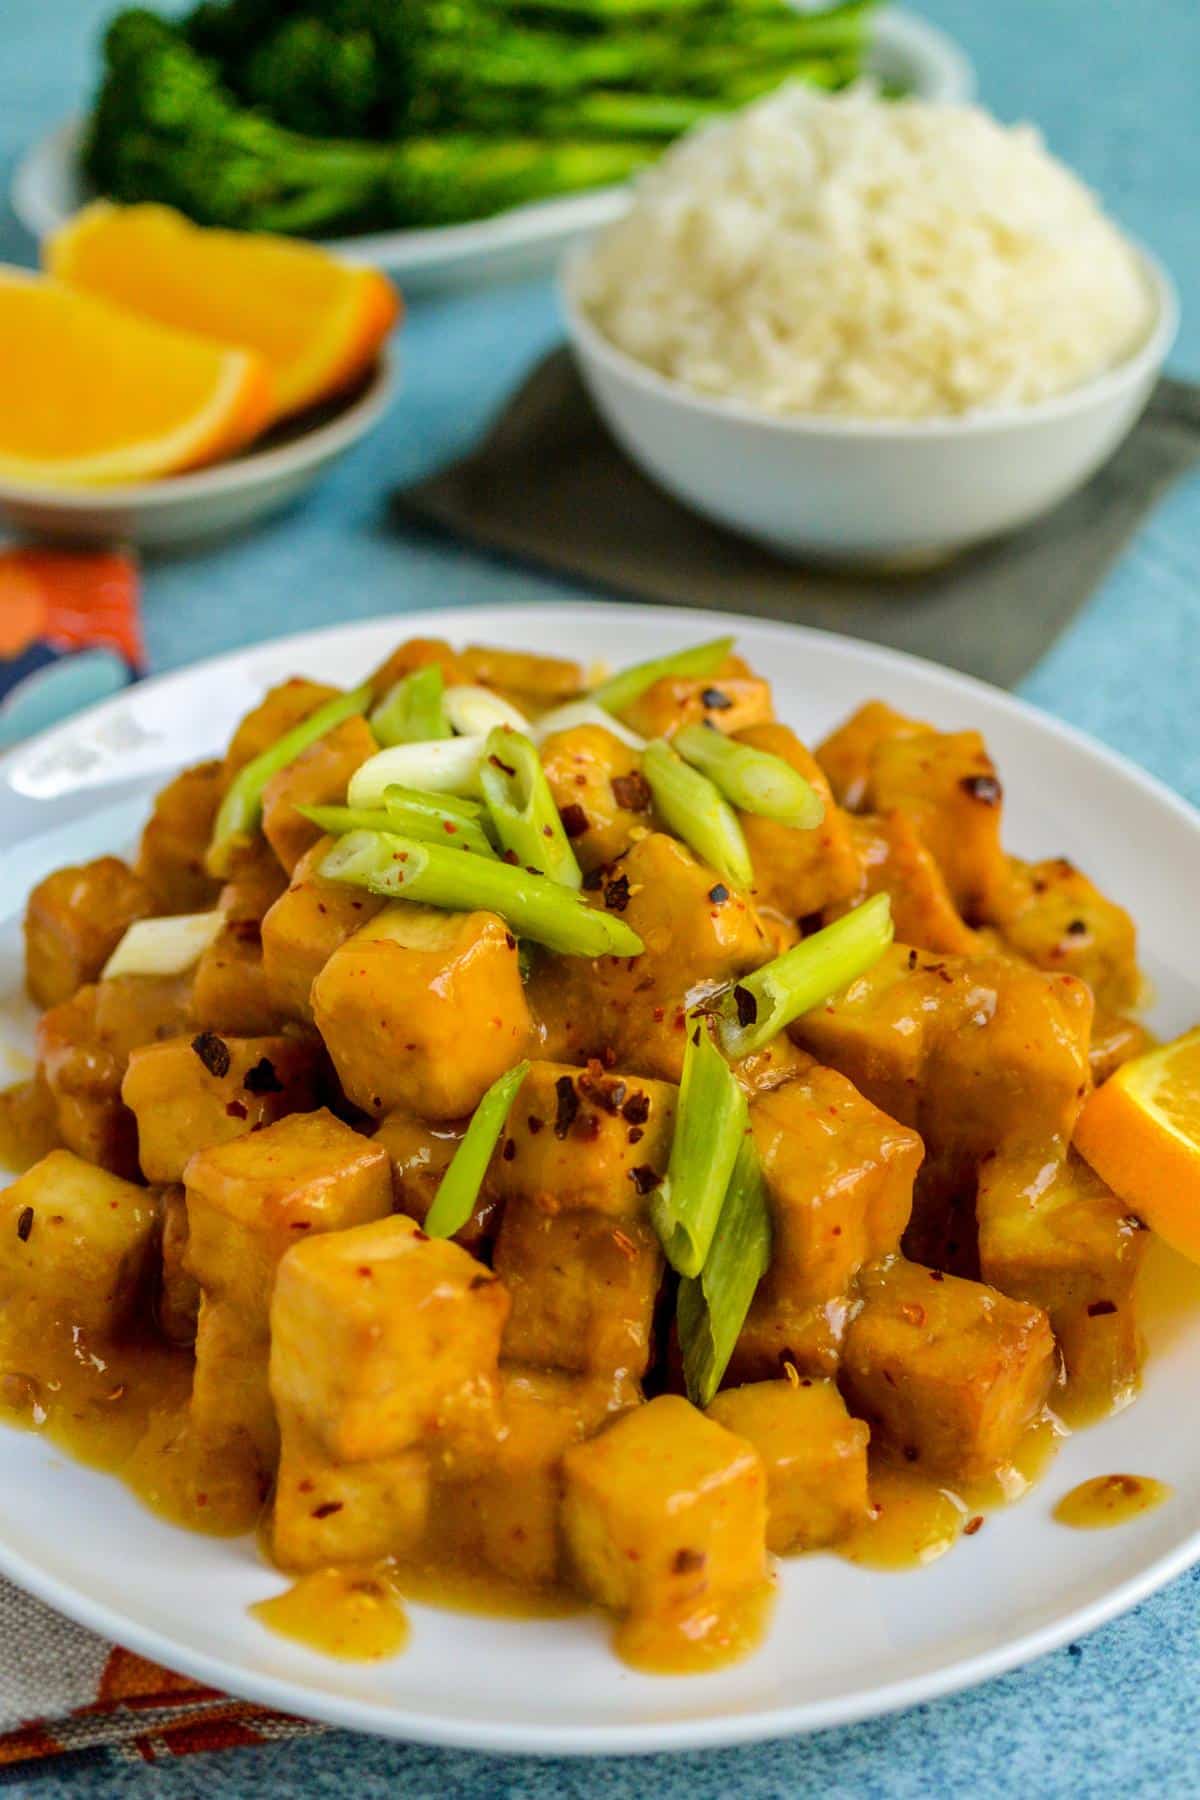 Orange Tofu on a plate garnished with sliced green onions.